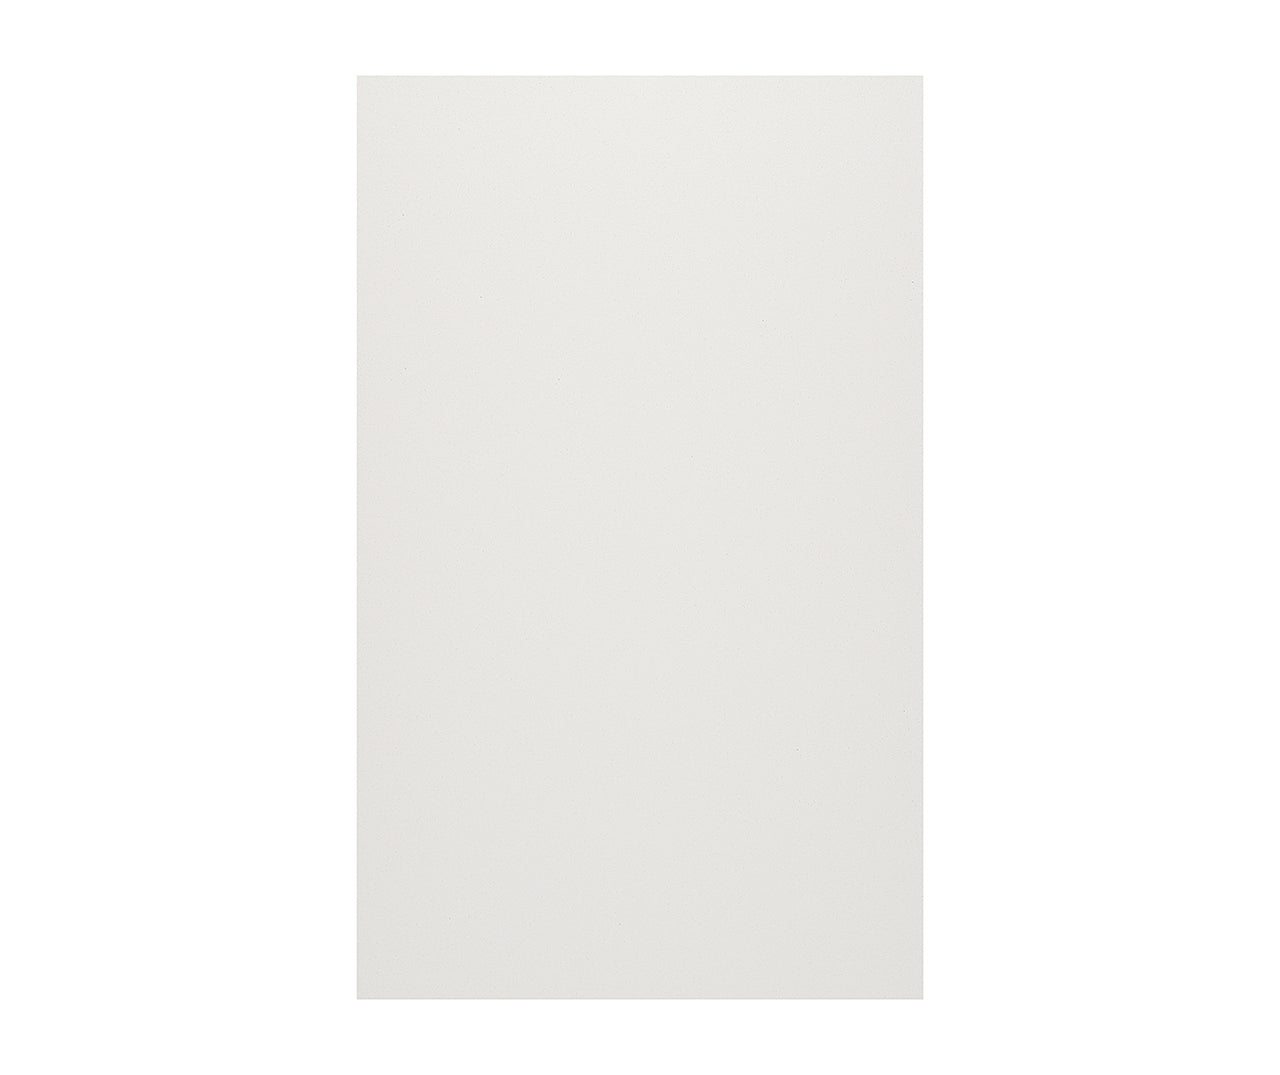 SS-3672-1 36 x 72 Swanstone Smooth Glue up Bathtub and Shower Single Wall Panel in Birch